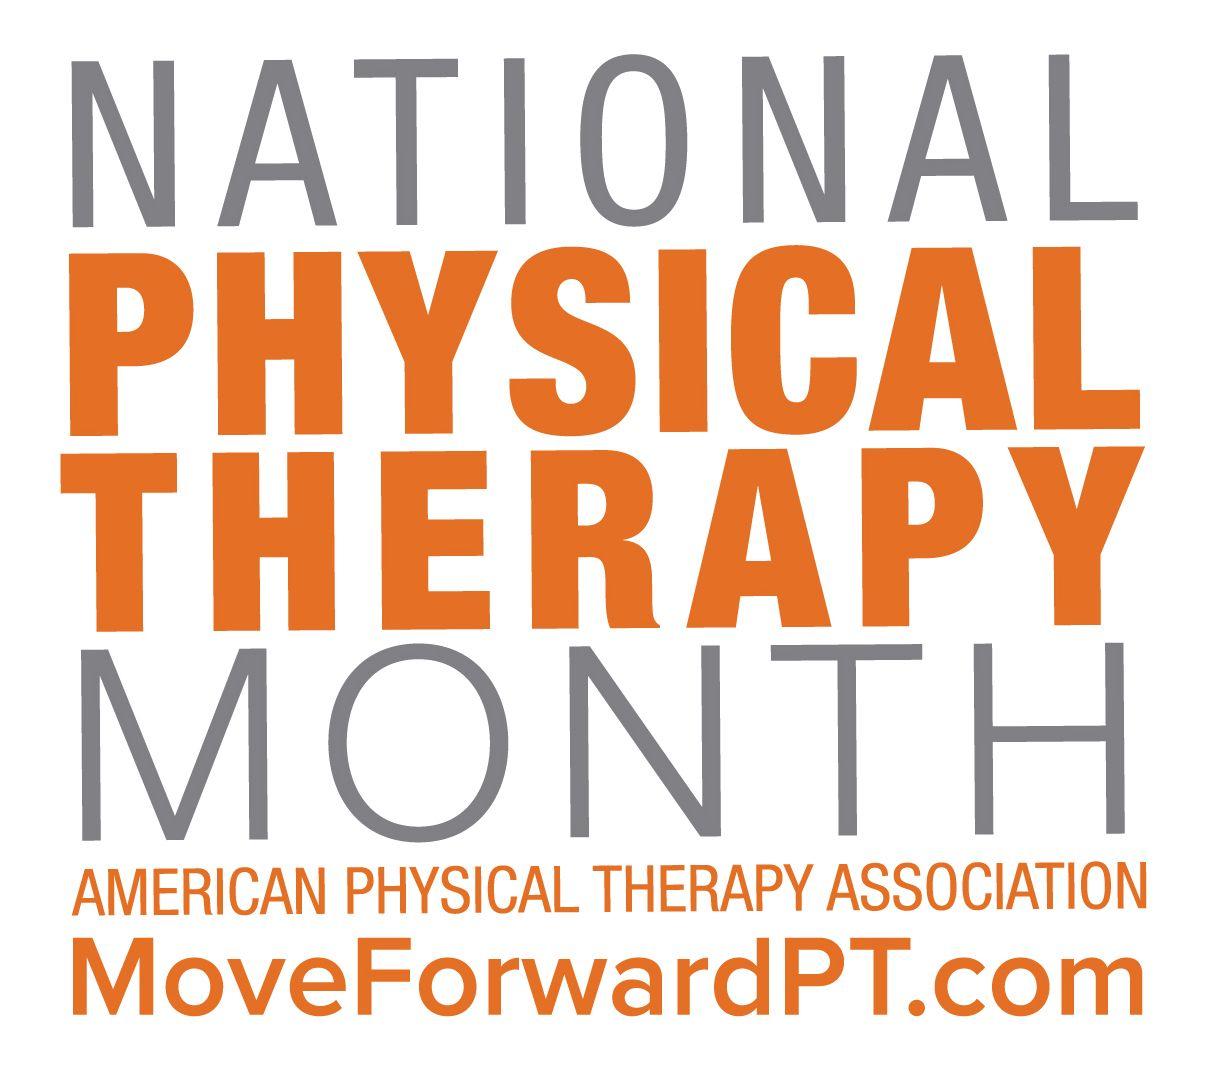 American Physical Therapy Association Logo - National Physical Therapy Month (NPTM) Logo